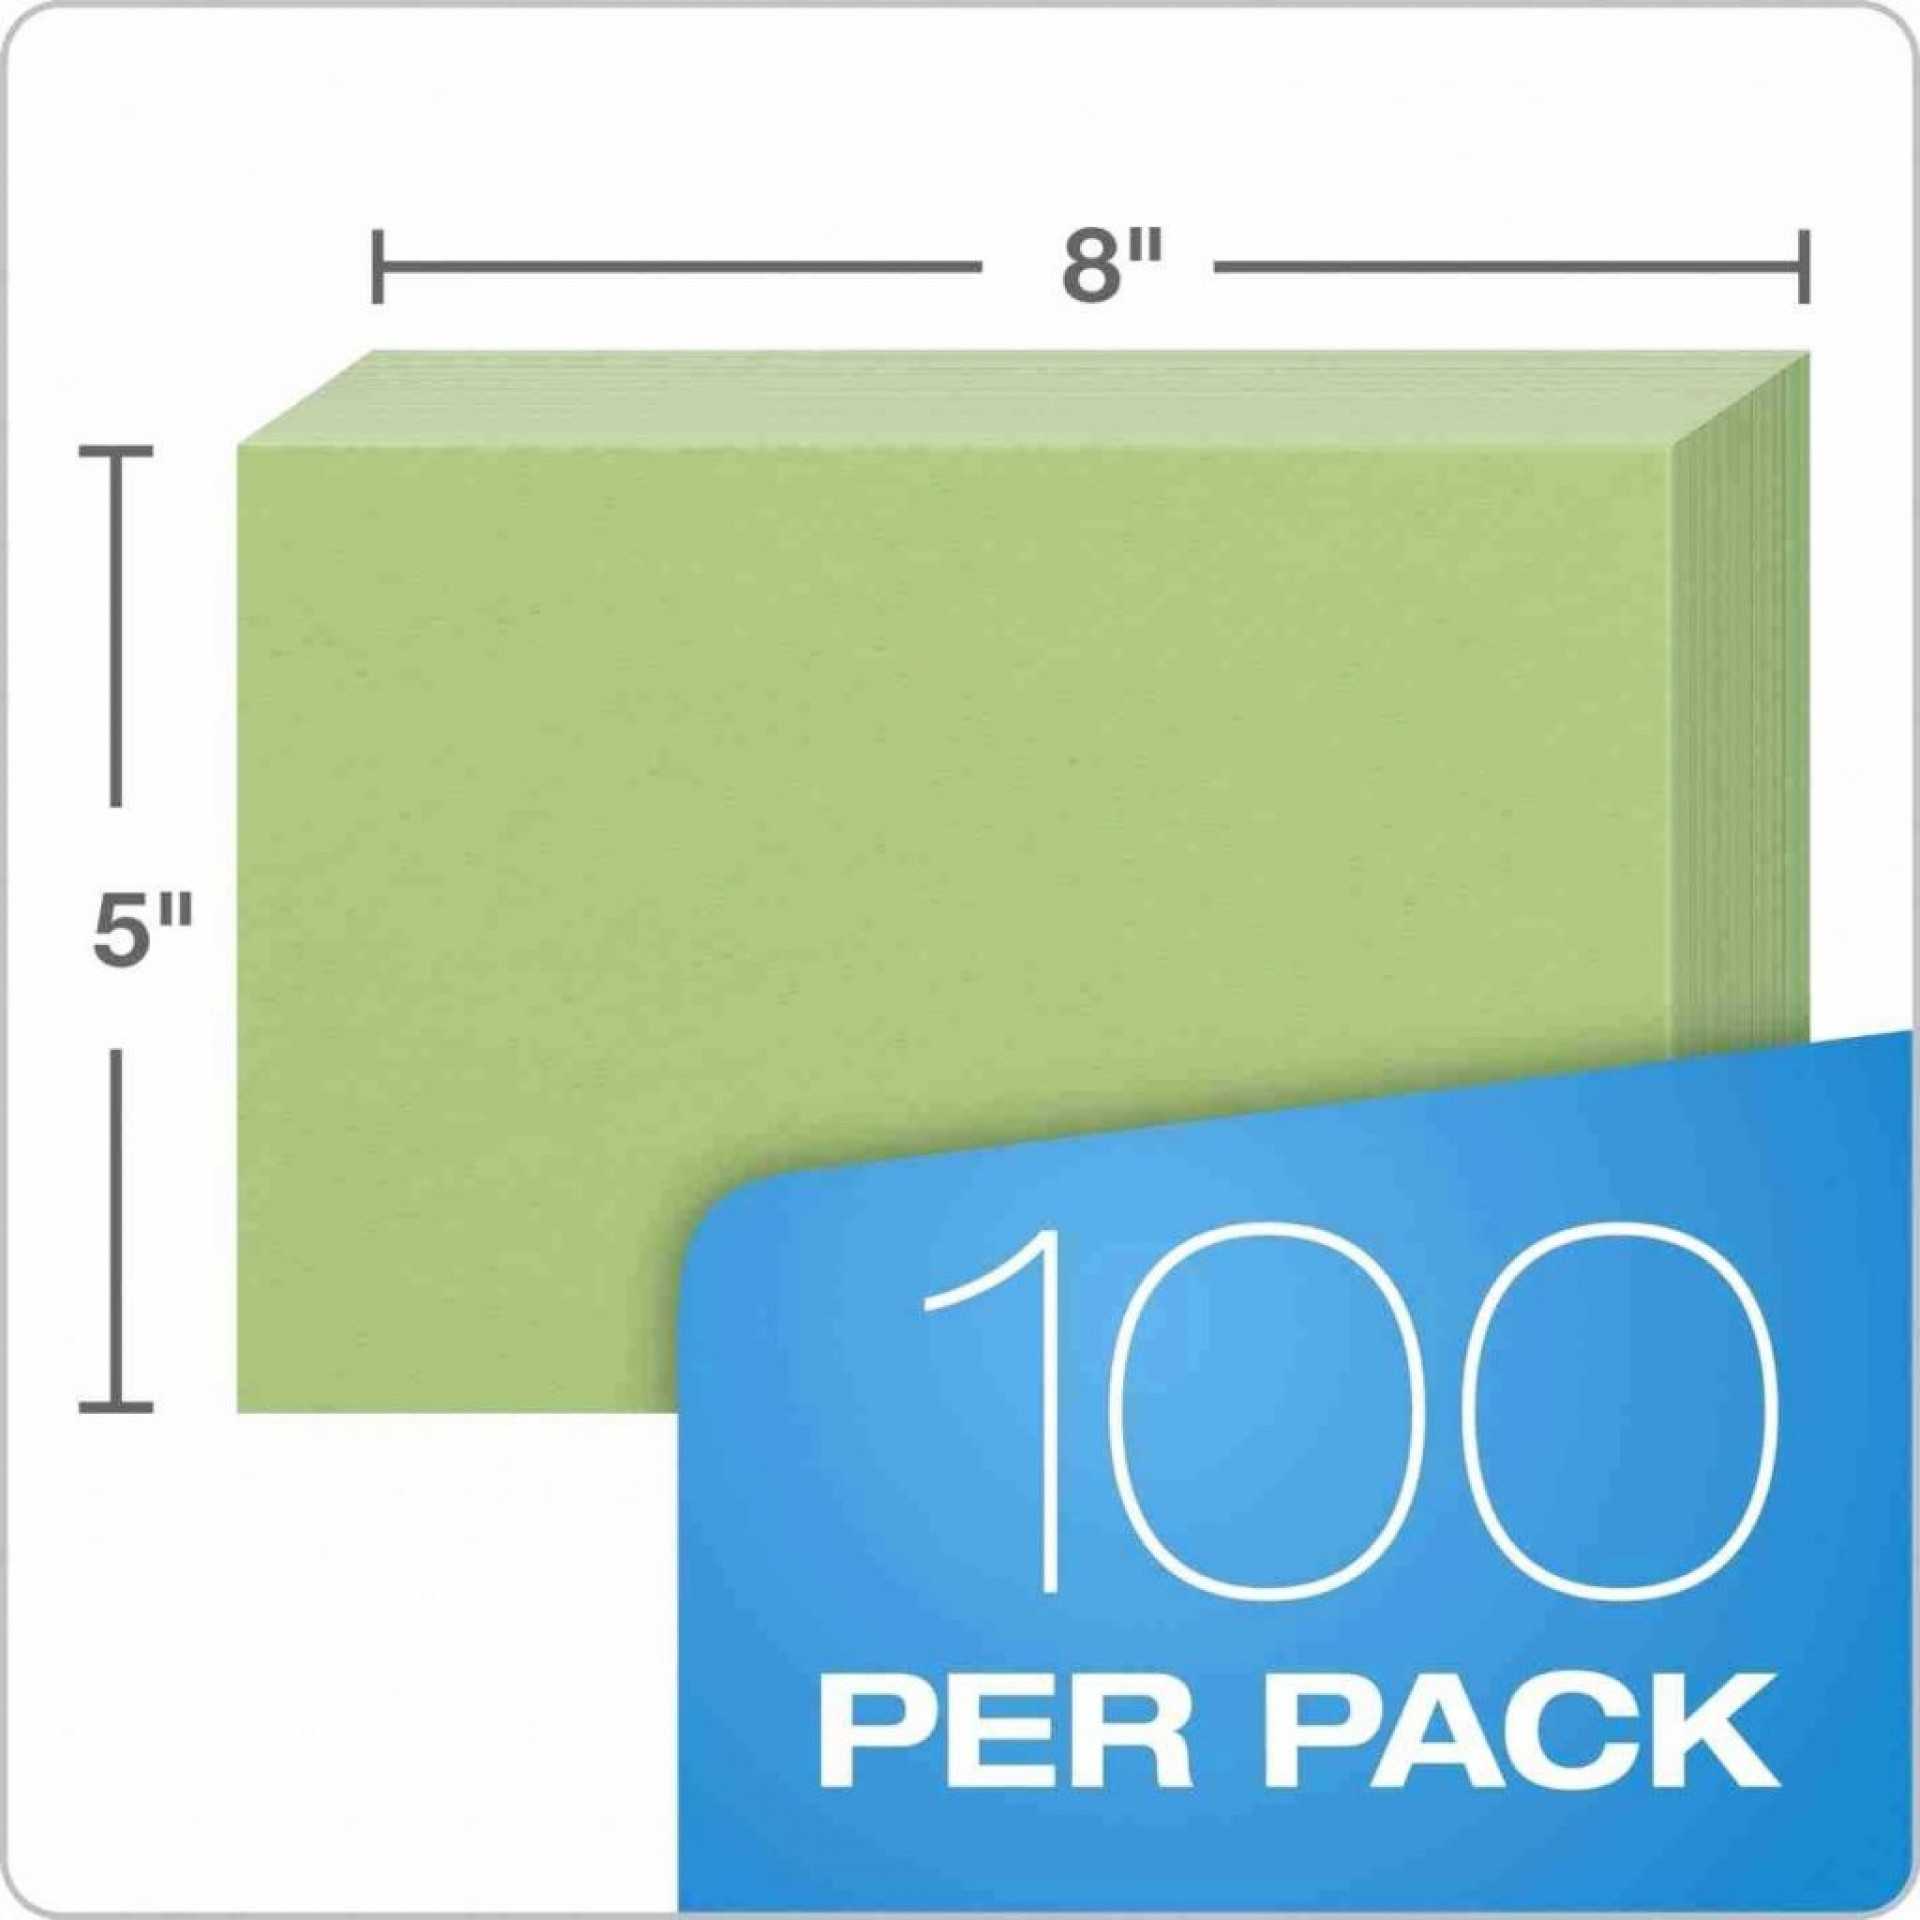 009 Template Ideas Index Card Word Impressive 3X5 Microsoft Pertaining To 4X6 Note Card Template Word